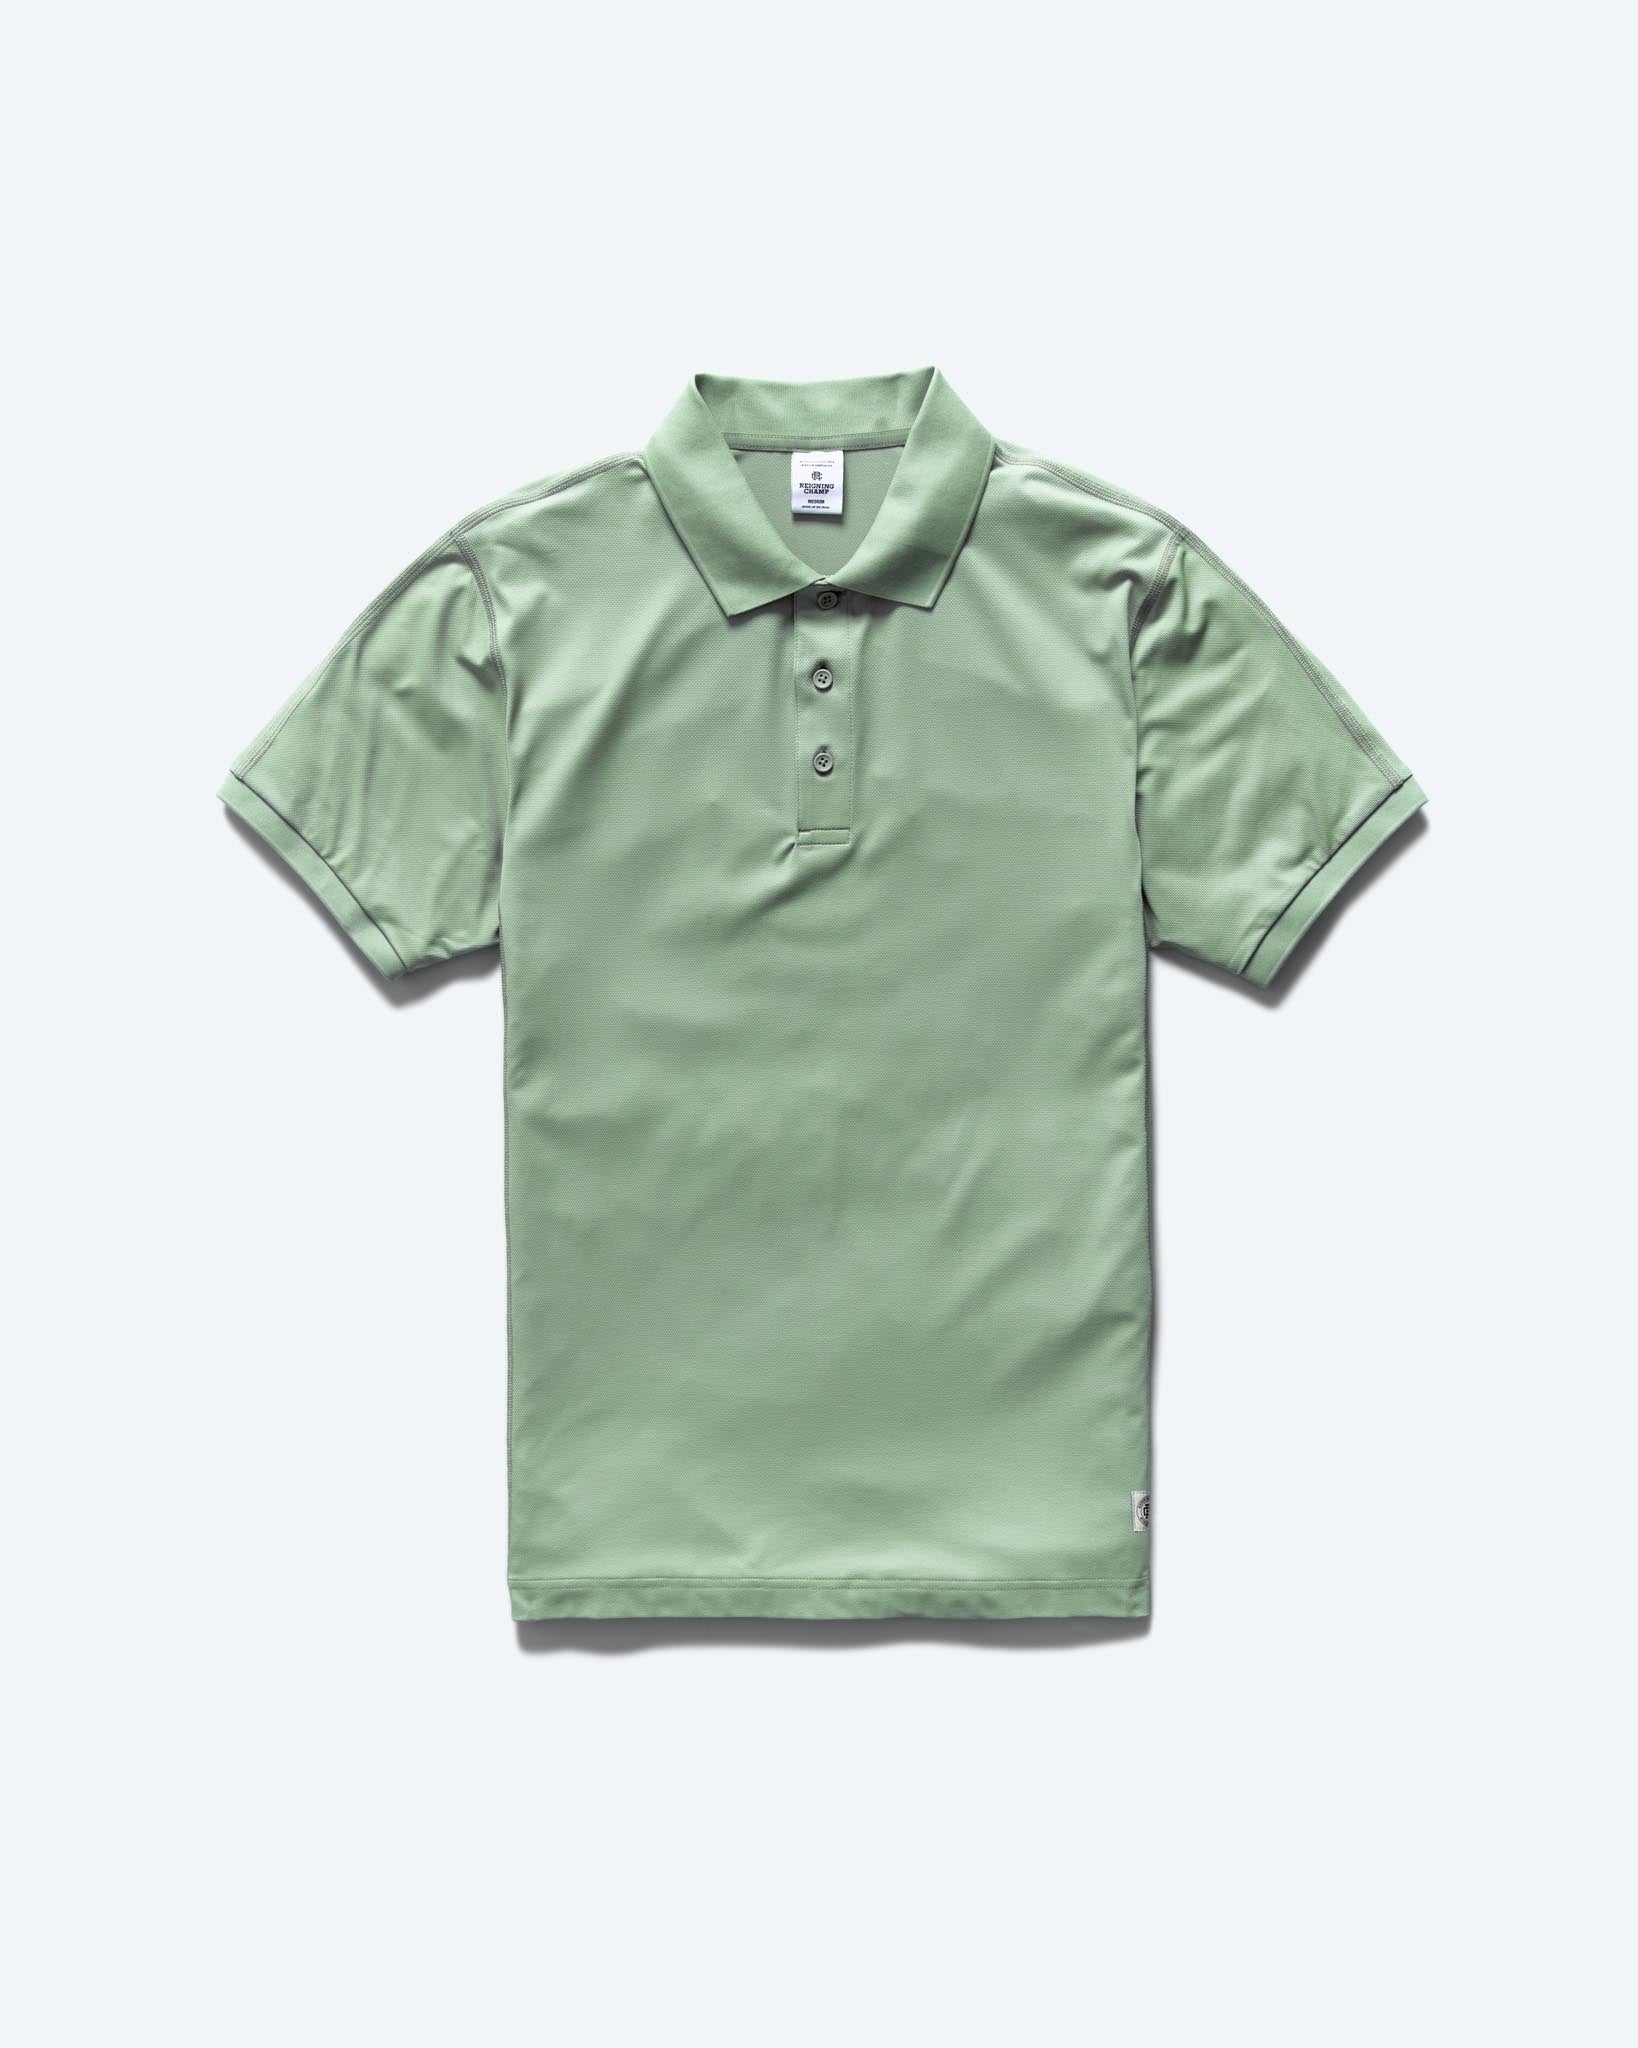 Reigning Champ Tech Pique Playoff Polo in Mineral Green